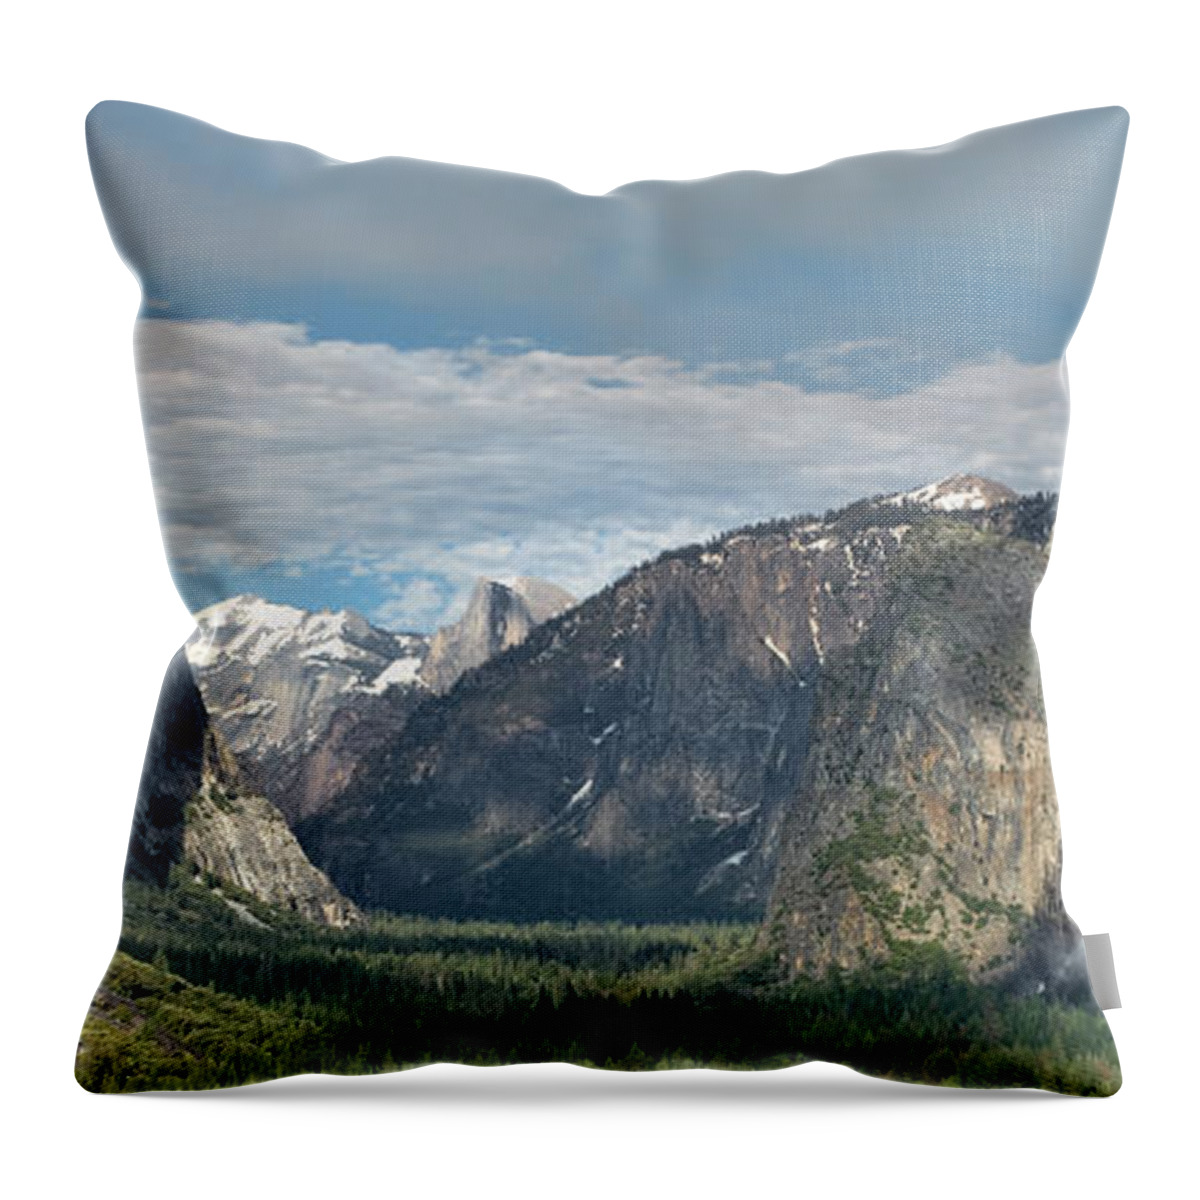 Yosemite Throw Pillow featuring the photograph Yosemite Valley Afternoon by Sandra Bronstein